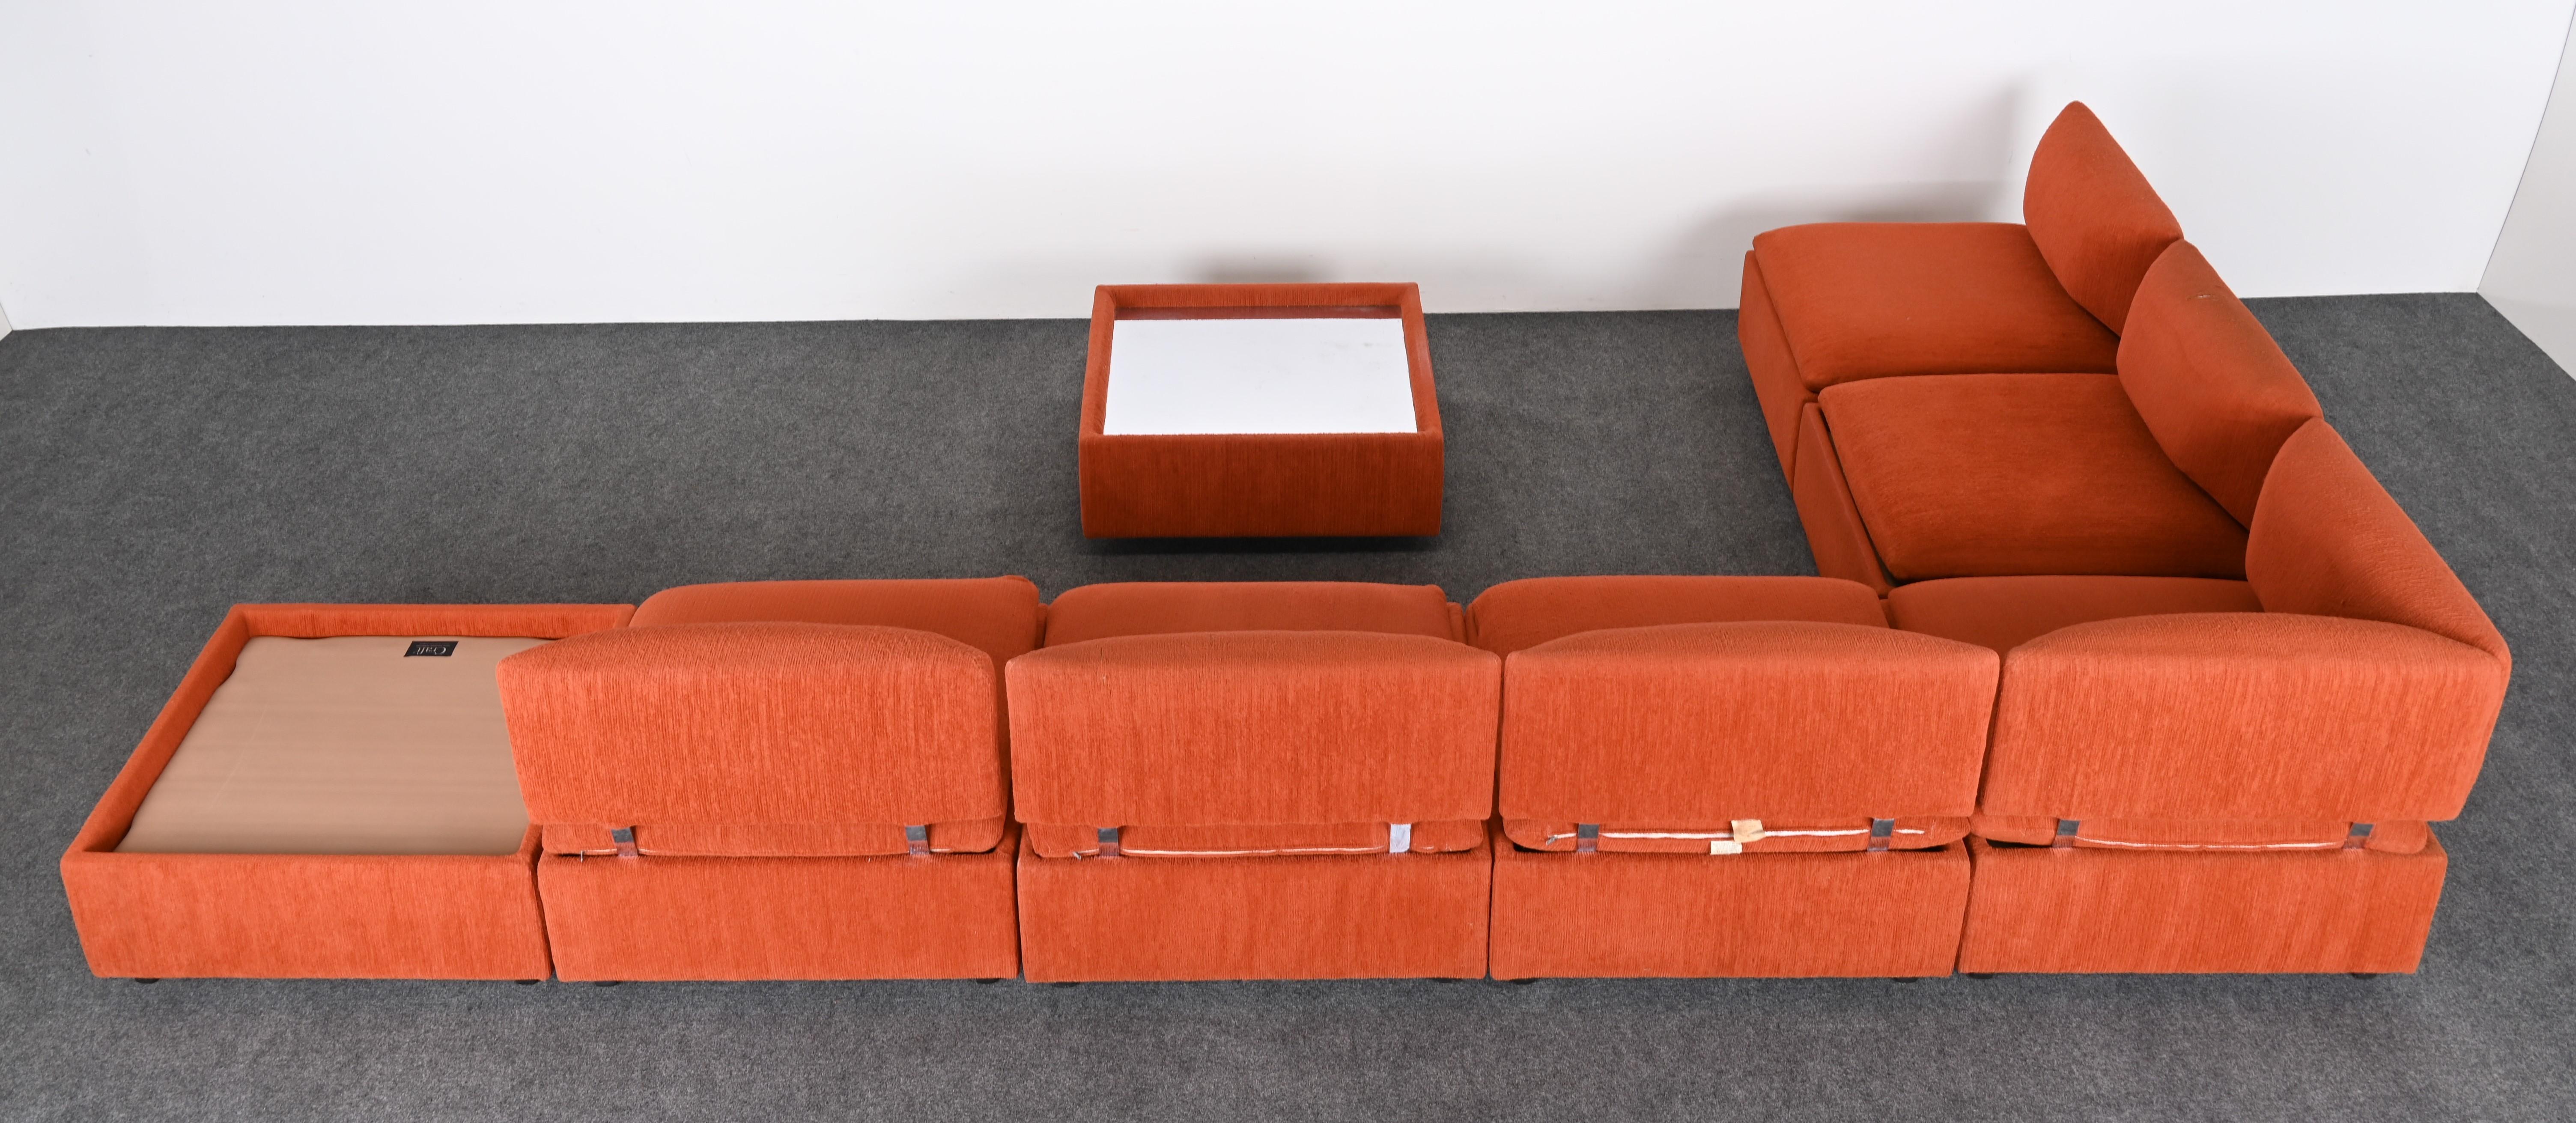 Eight Piece Sectional Sofa by Adrian Pearsall for Craft, 1970s 11